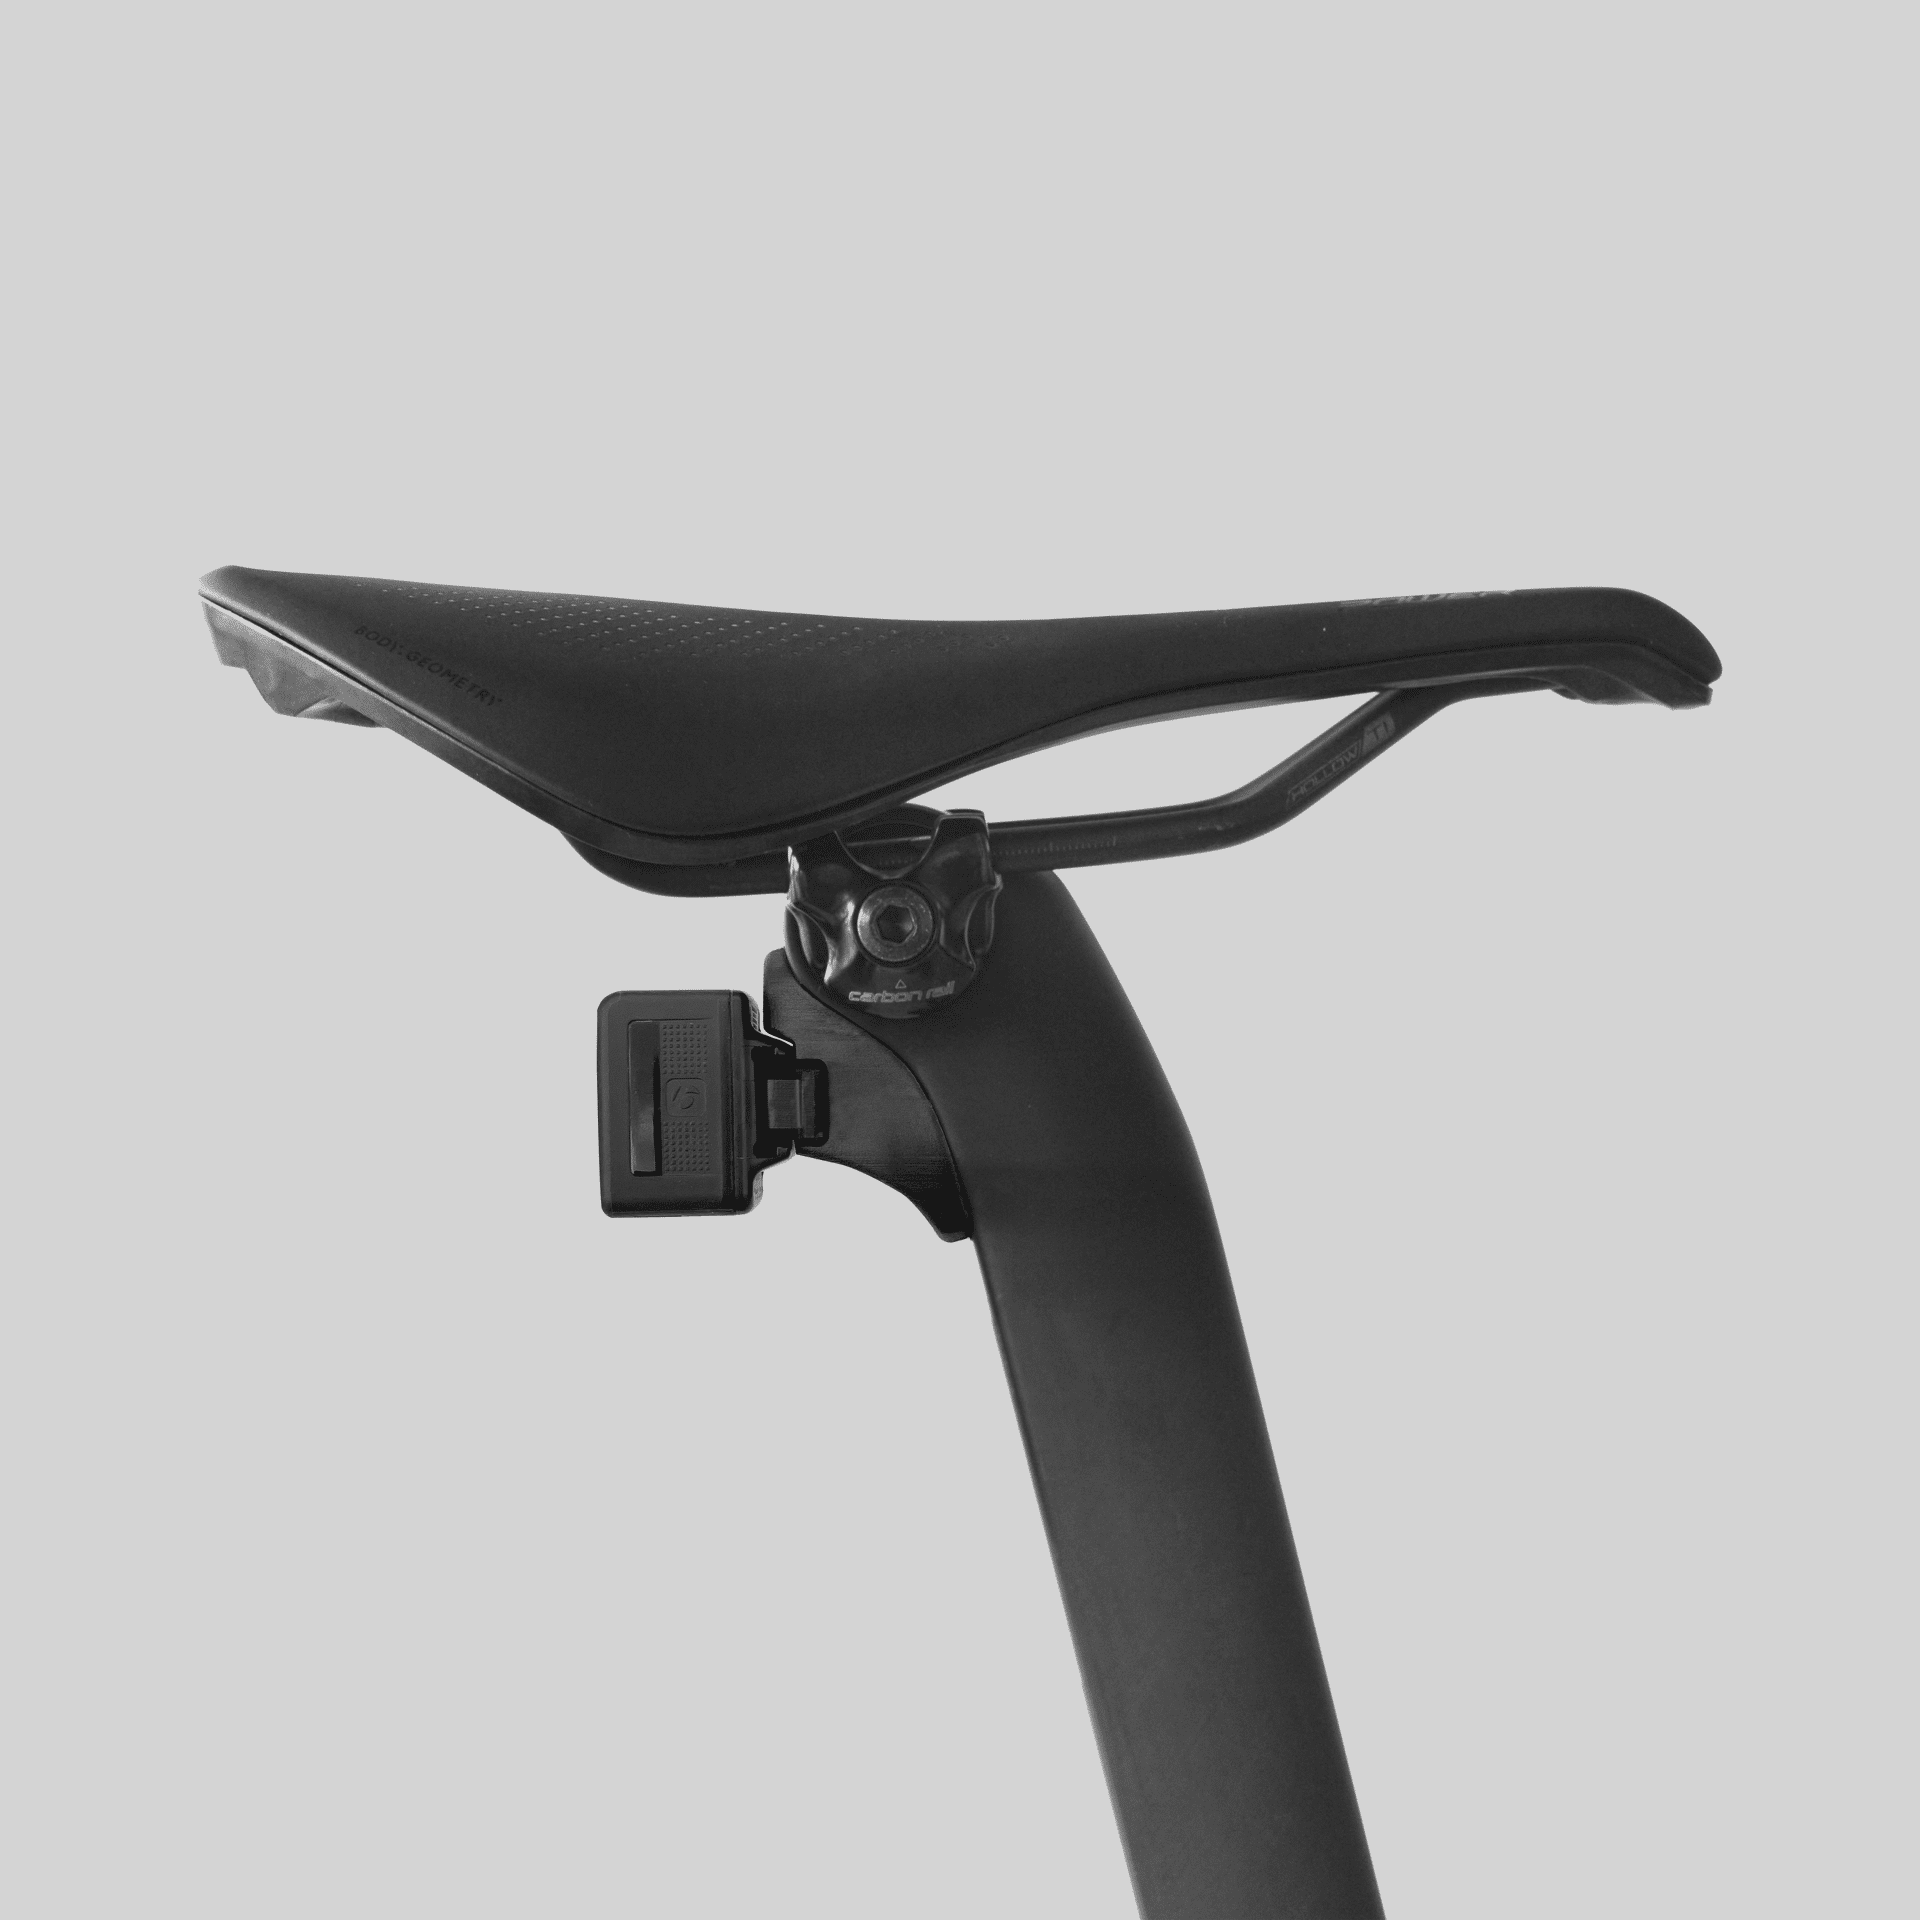 Bontrager Flare Mount for Specialized Tarmac SL7 Seatpost with DI2 Port